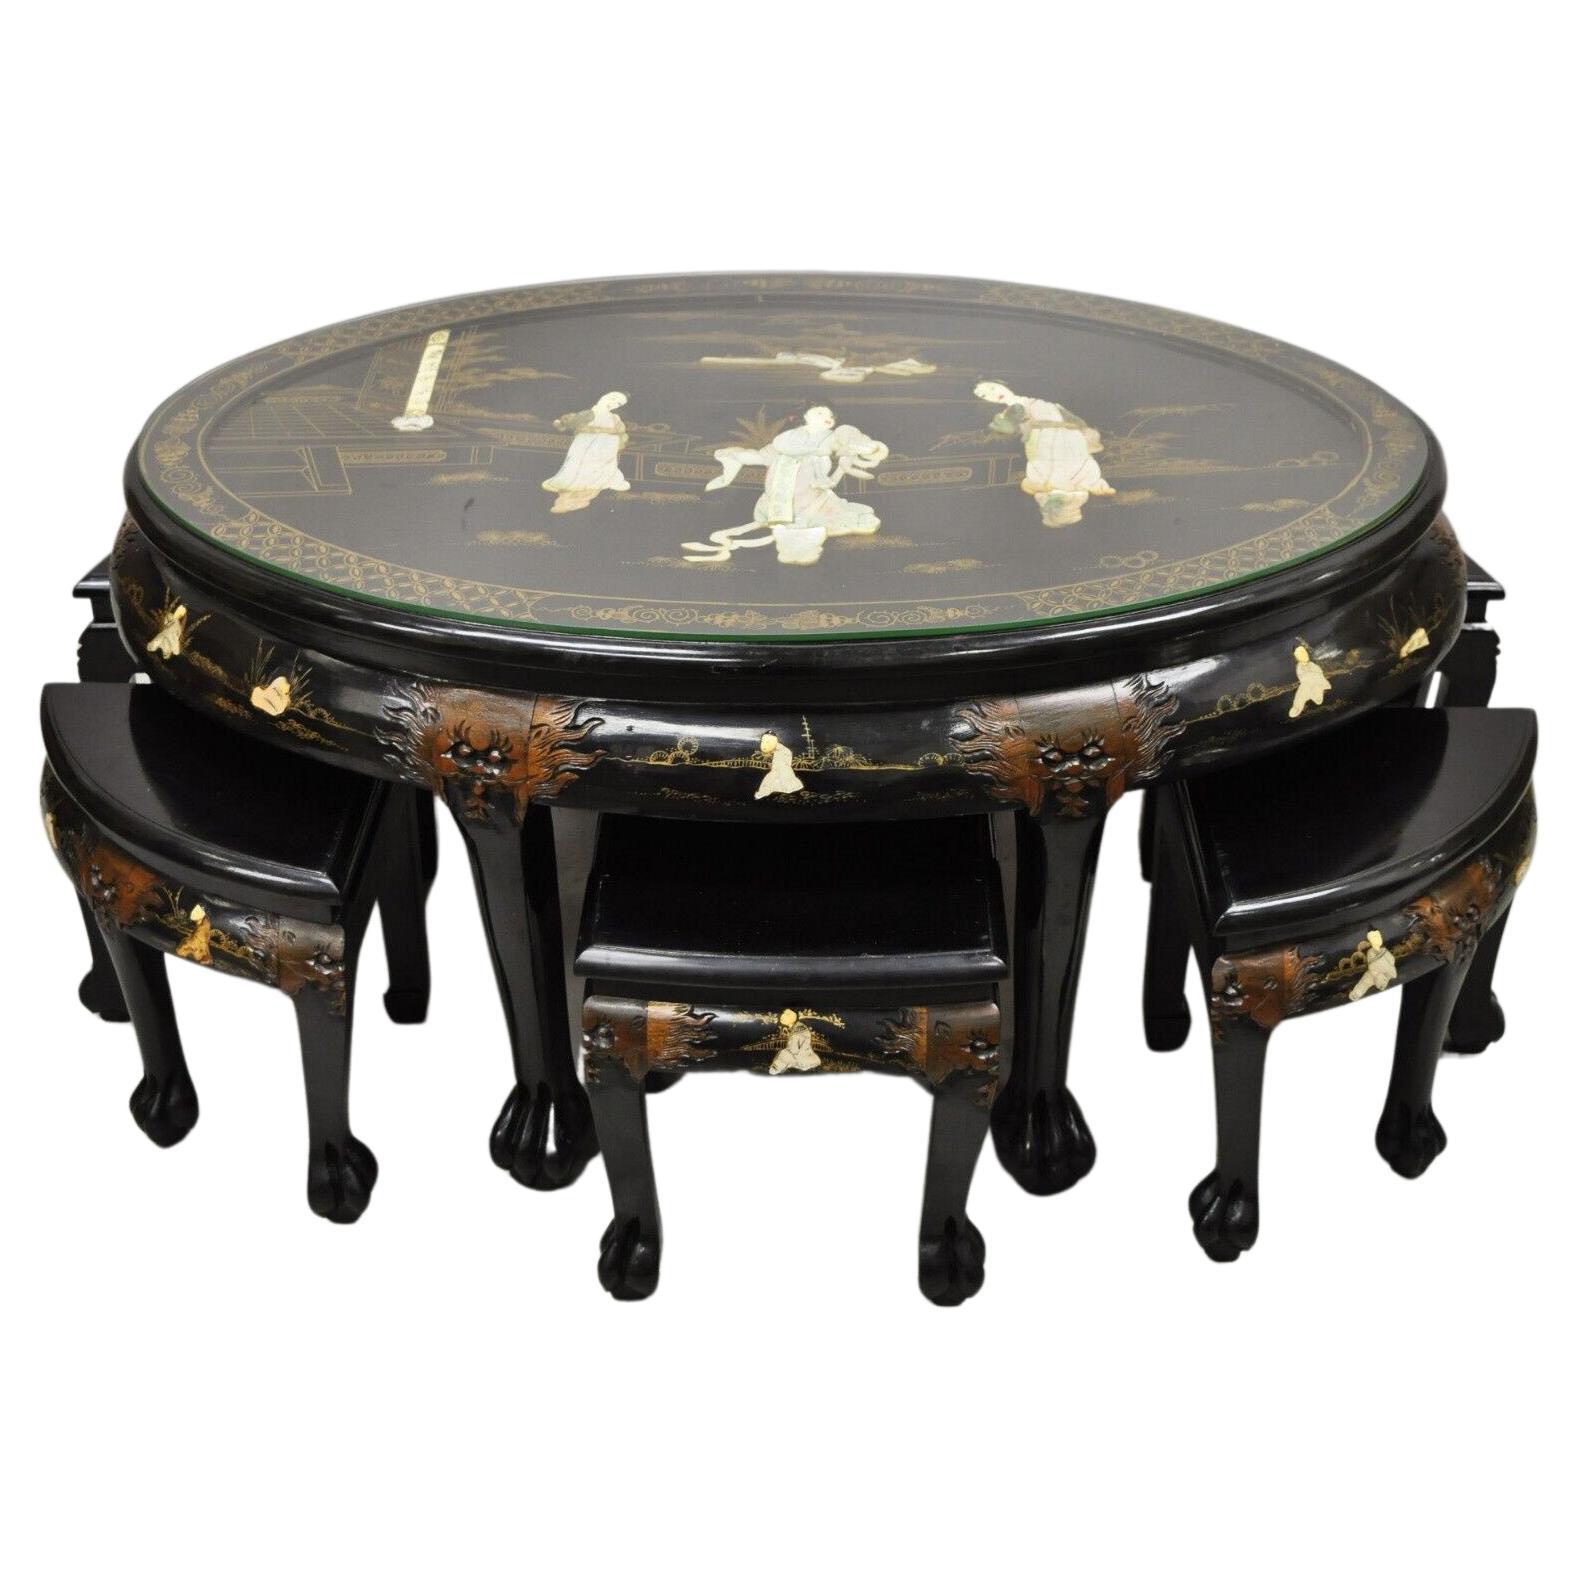 Chinese Black Lacquer Mother of Pearl Oval Nesting Coffee Table Set 6 Stools - A For Sale